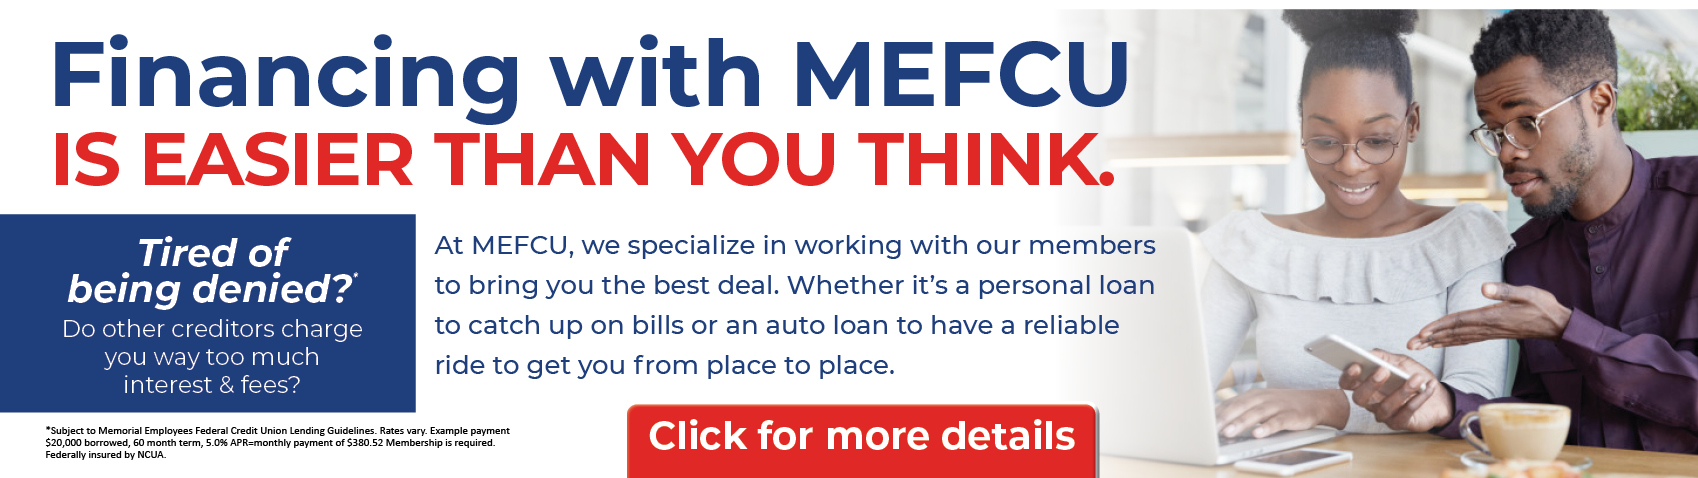 Financing with MEFCU IS EASIER THAN YOU THINK. Tired of being Denied?* Do other creditors charge you way too much interest & fees?
At MEFCU, we specialize in working with out members to bring you the best deal. Whether it's a personal loan to catch up on bills or an auto loan to have a reliable ride to get you from place to place.
Click for more details
*for more info follow the link.